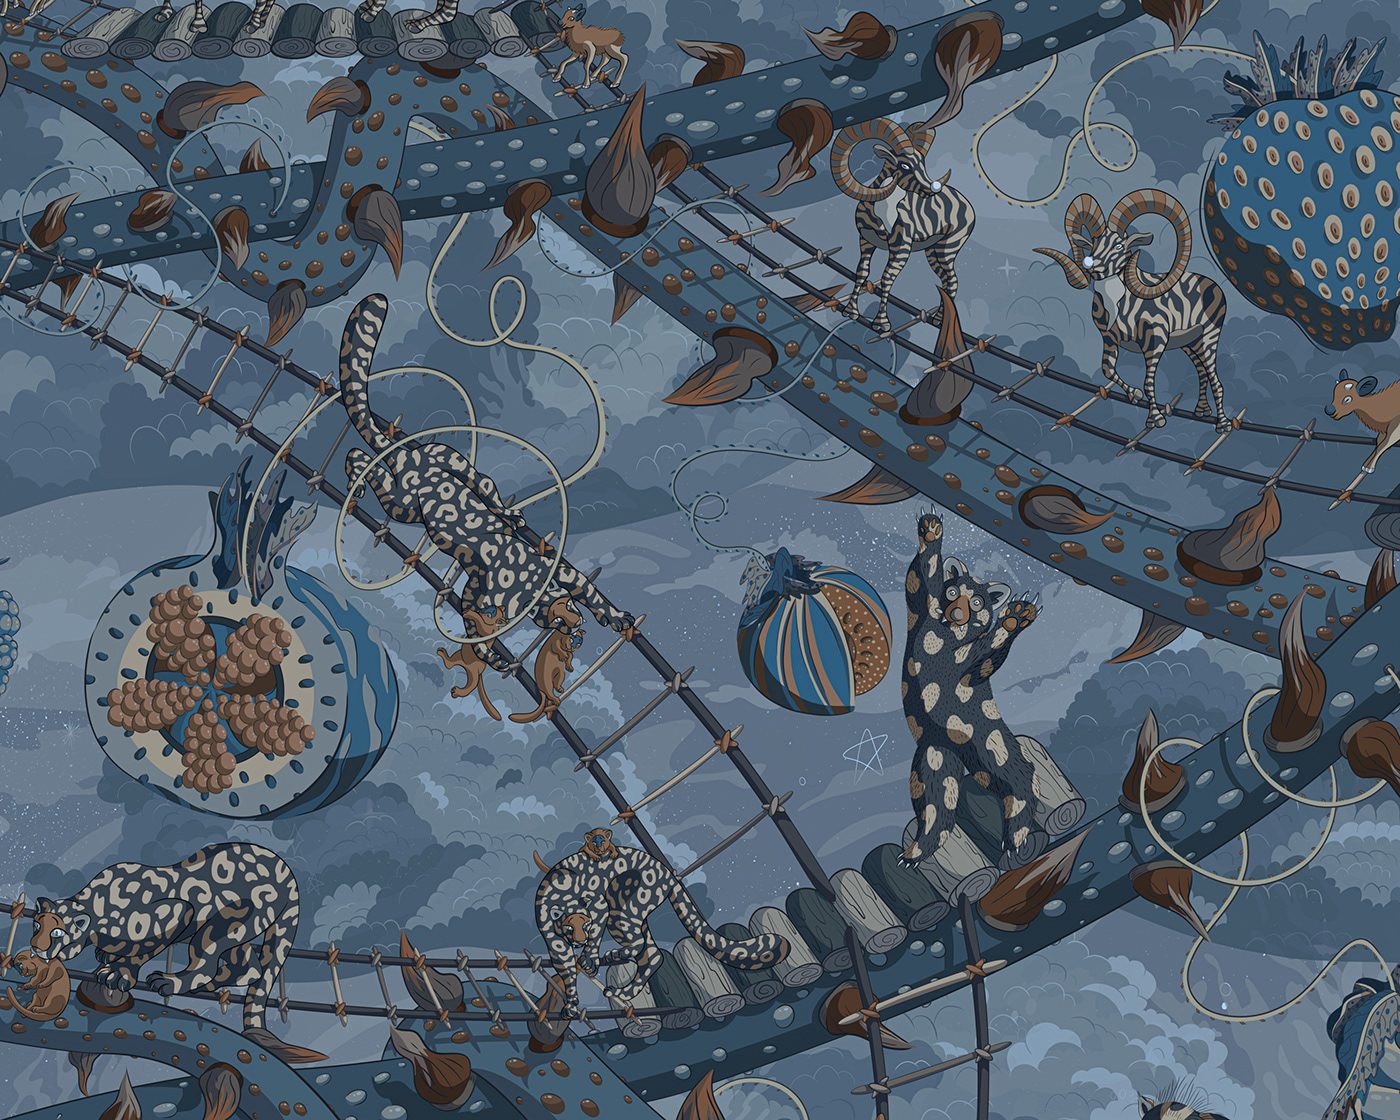 Repeat pattern of a dark and gloomy sky world showing various animals climbing ladders.